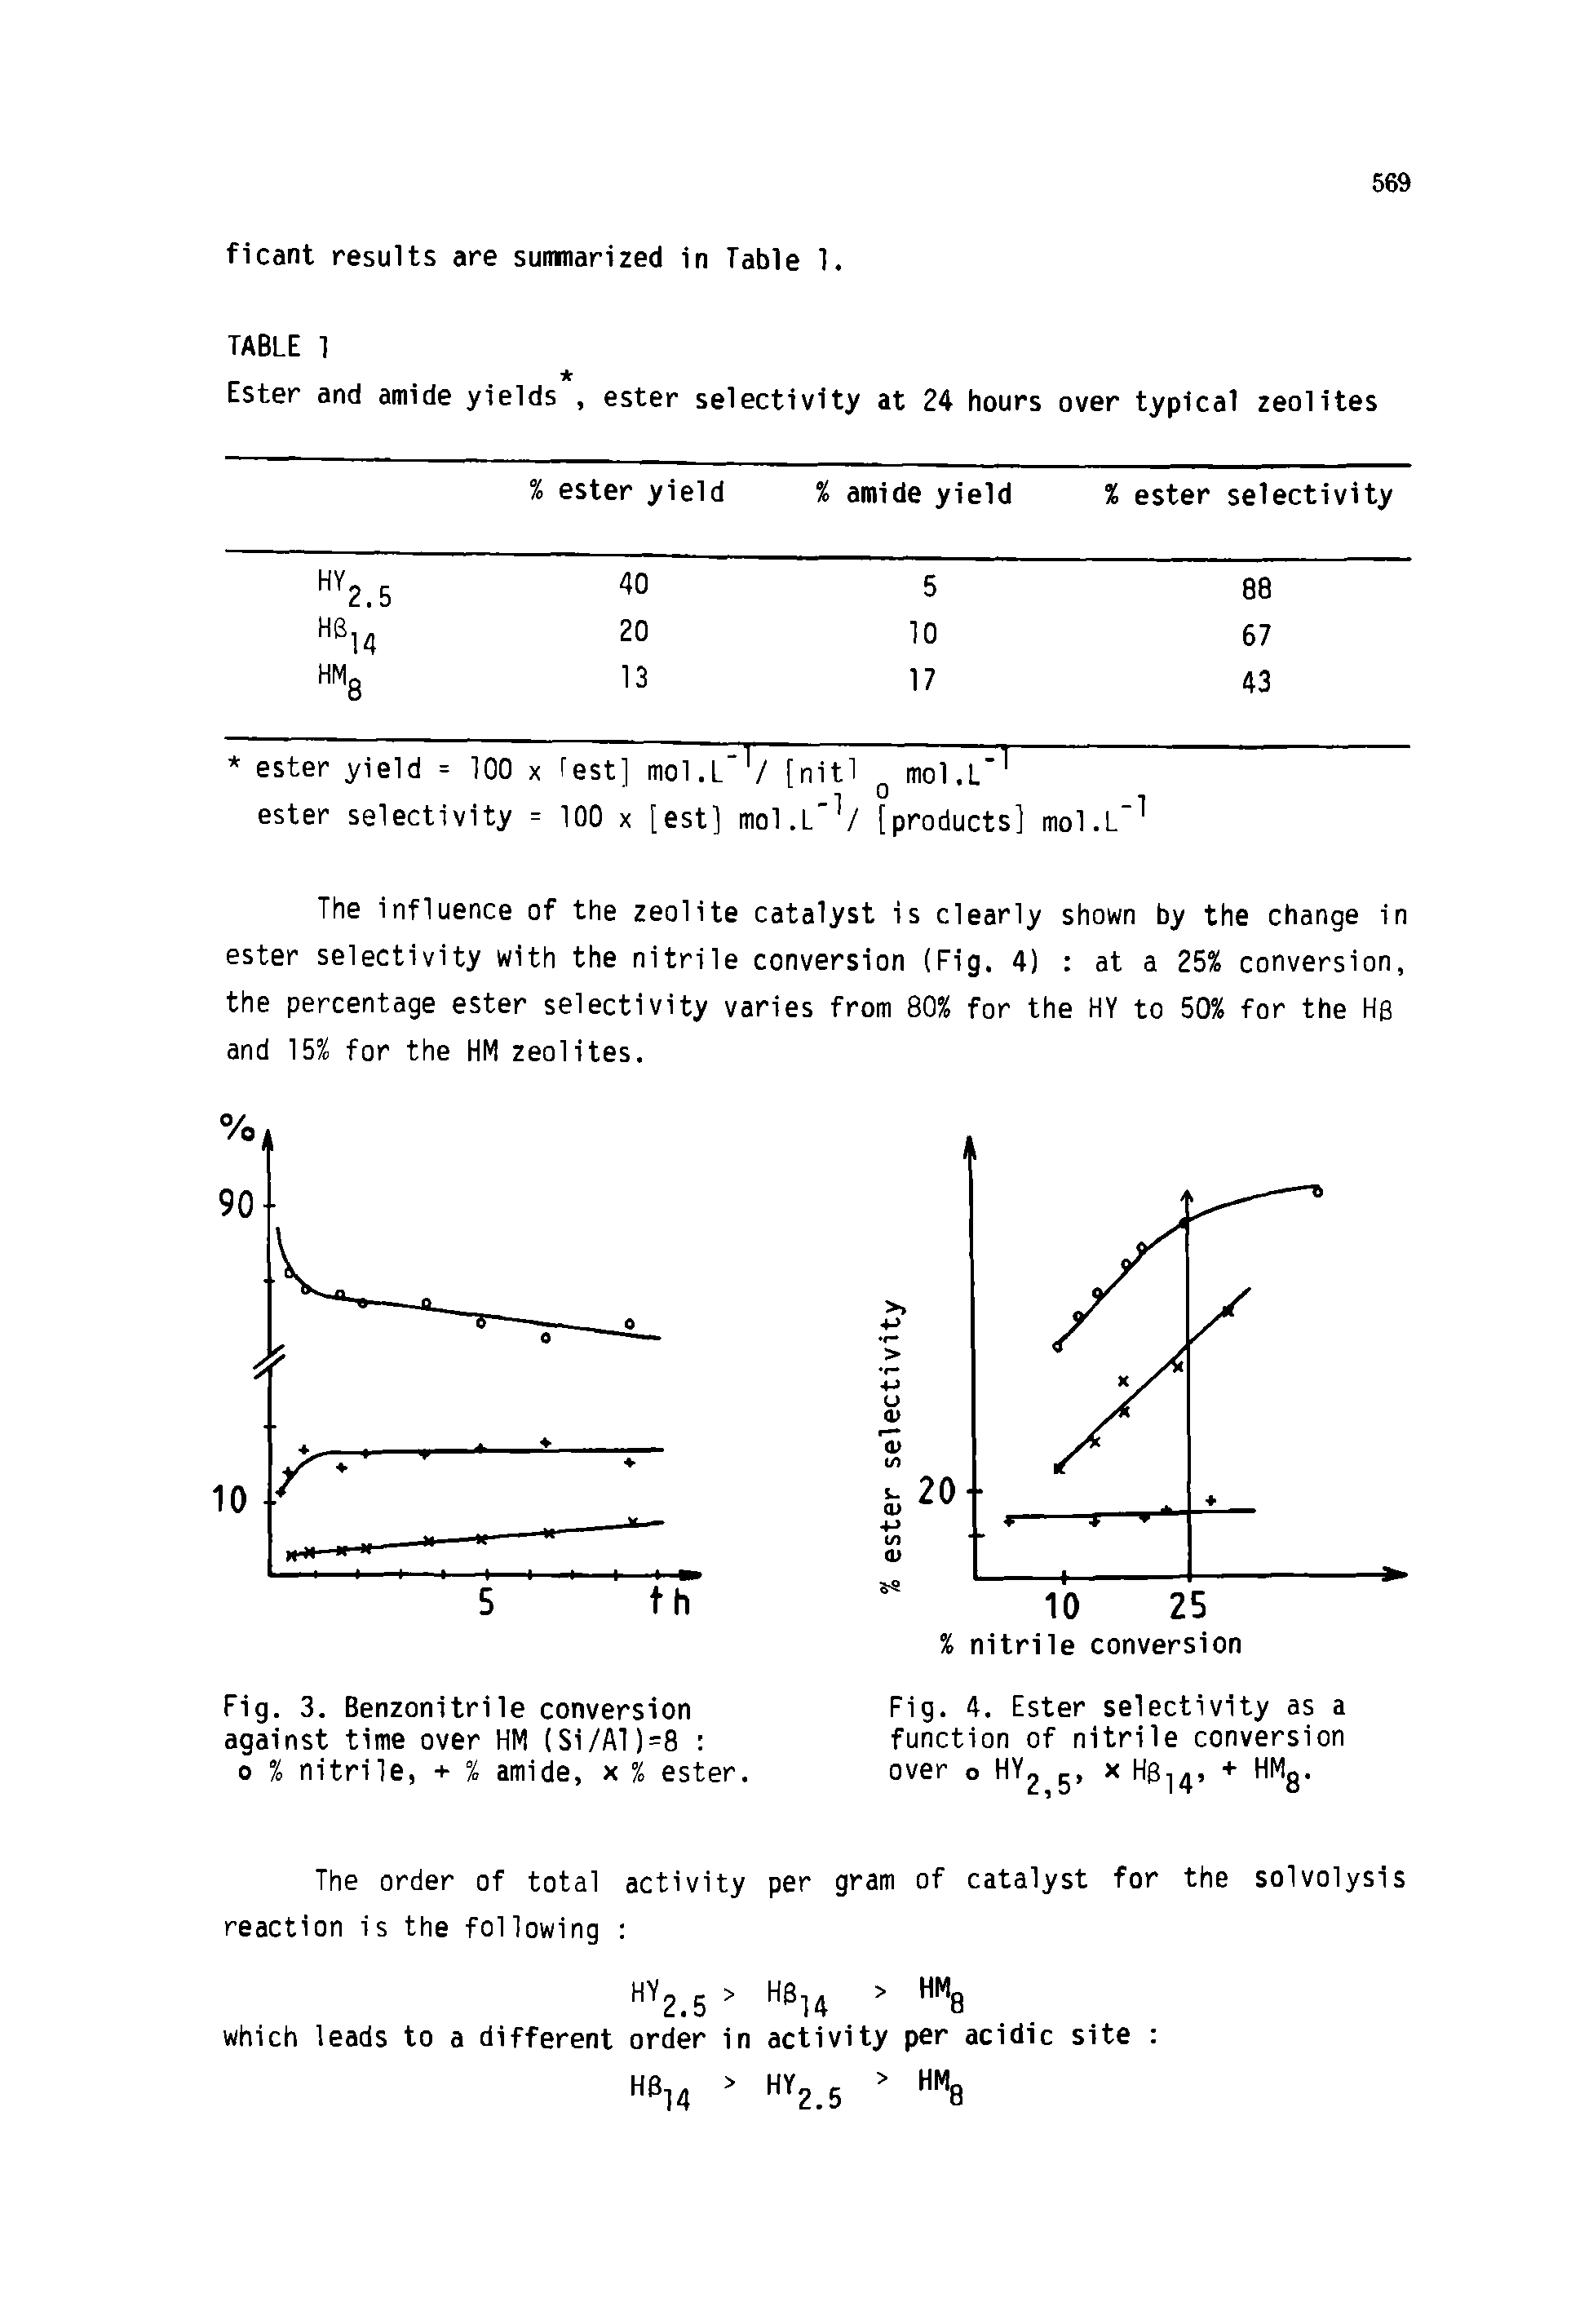 Fig. 4. Ester selectivity as a function of nitrile conversion over o HY2 x H014, + HMg.